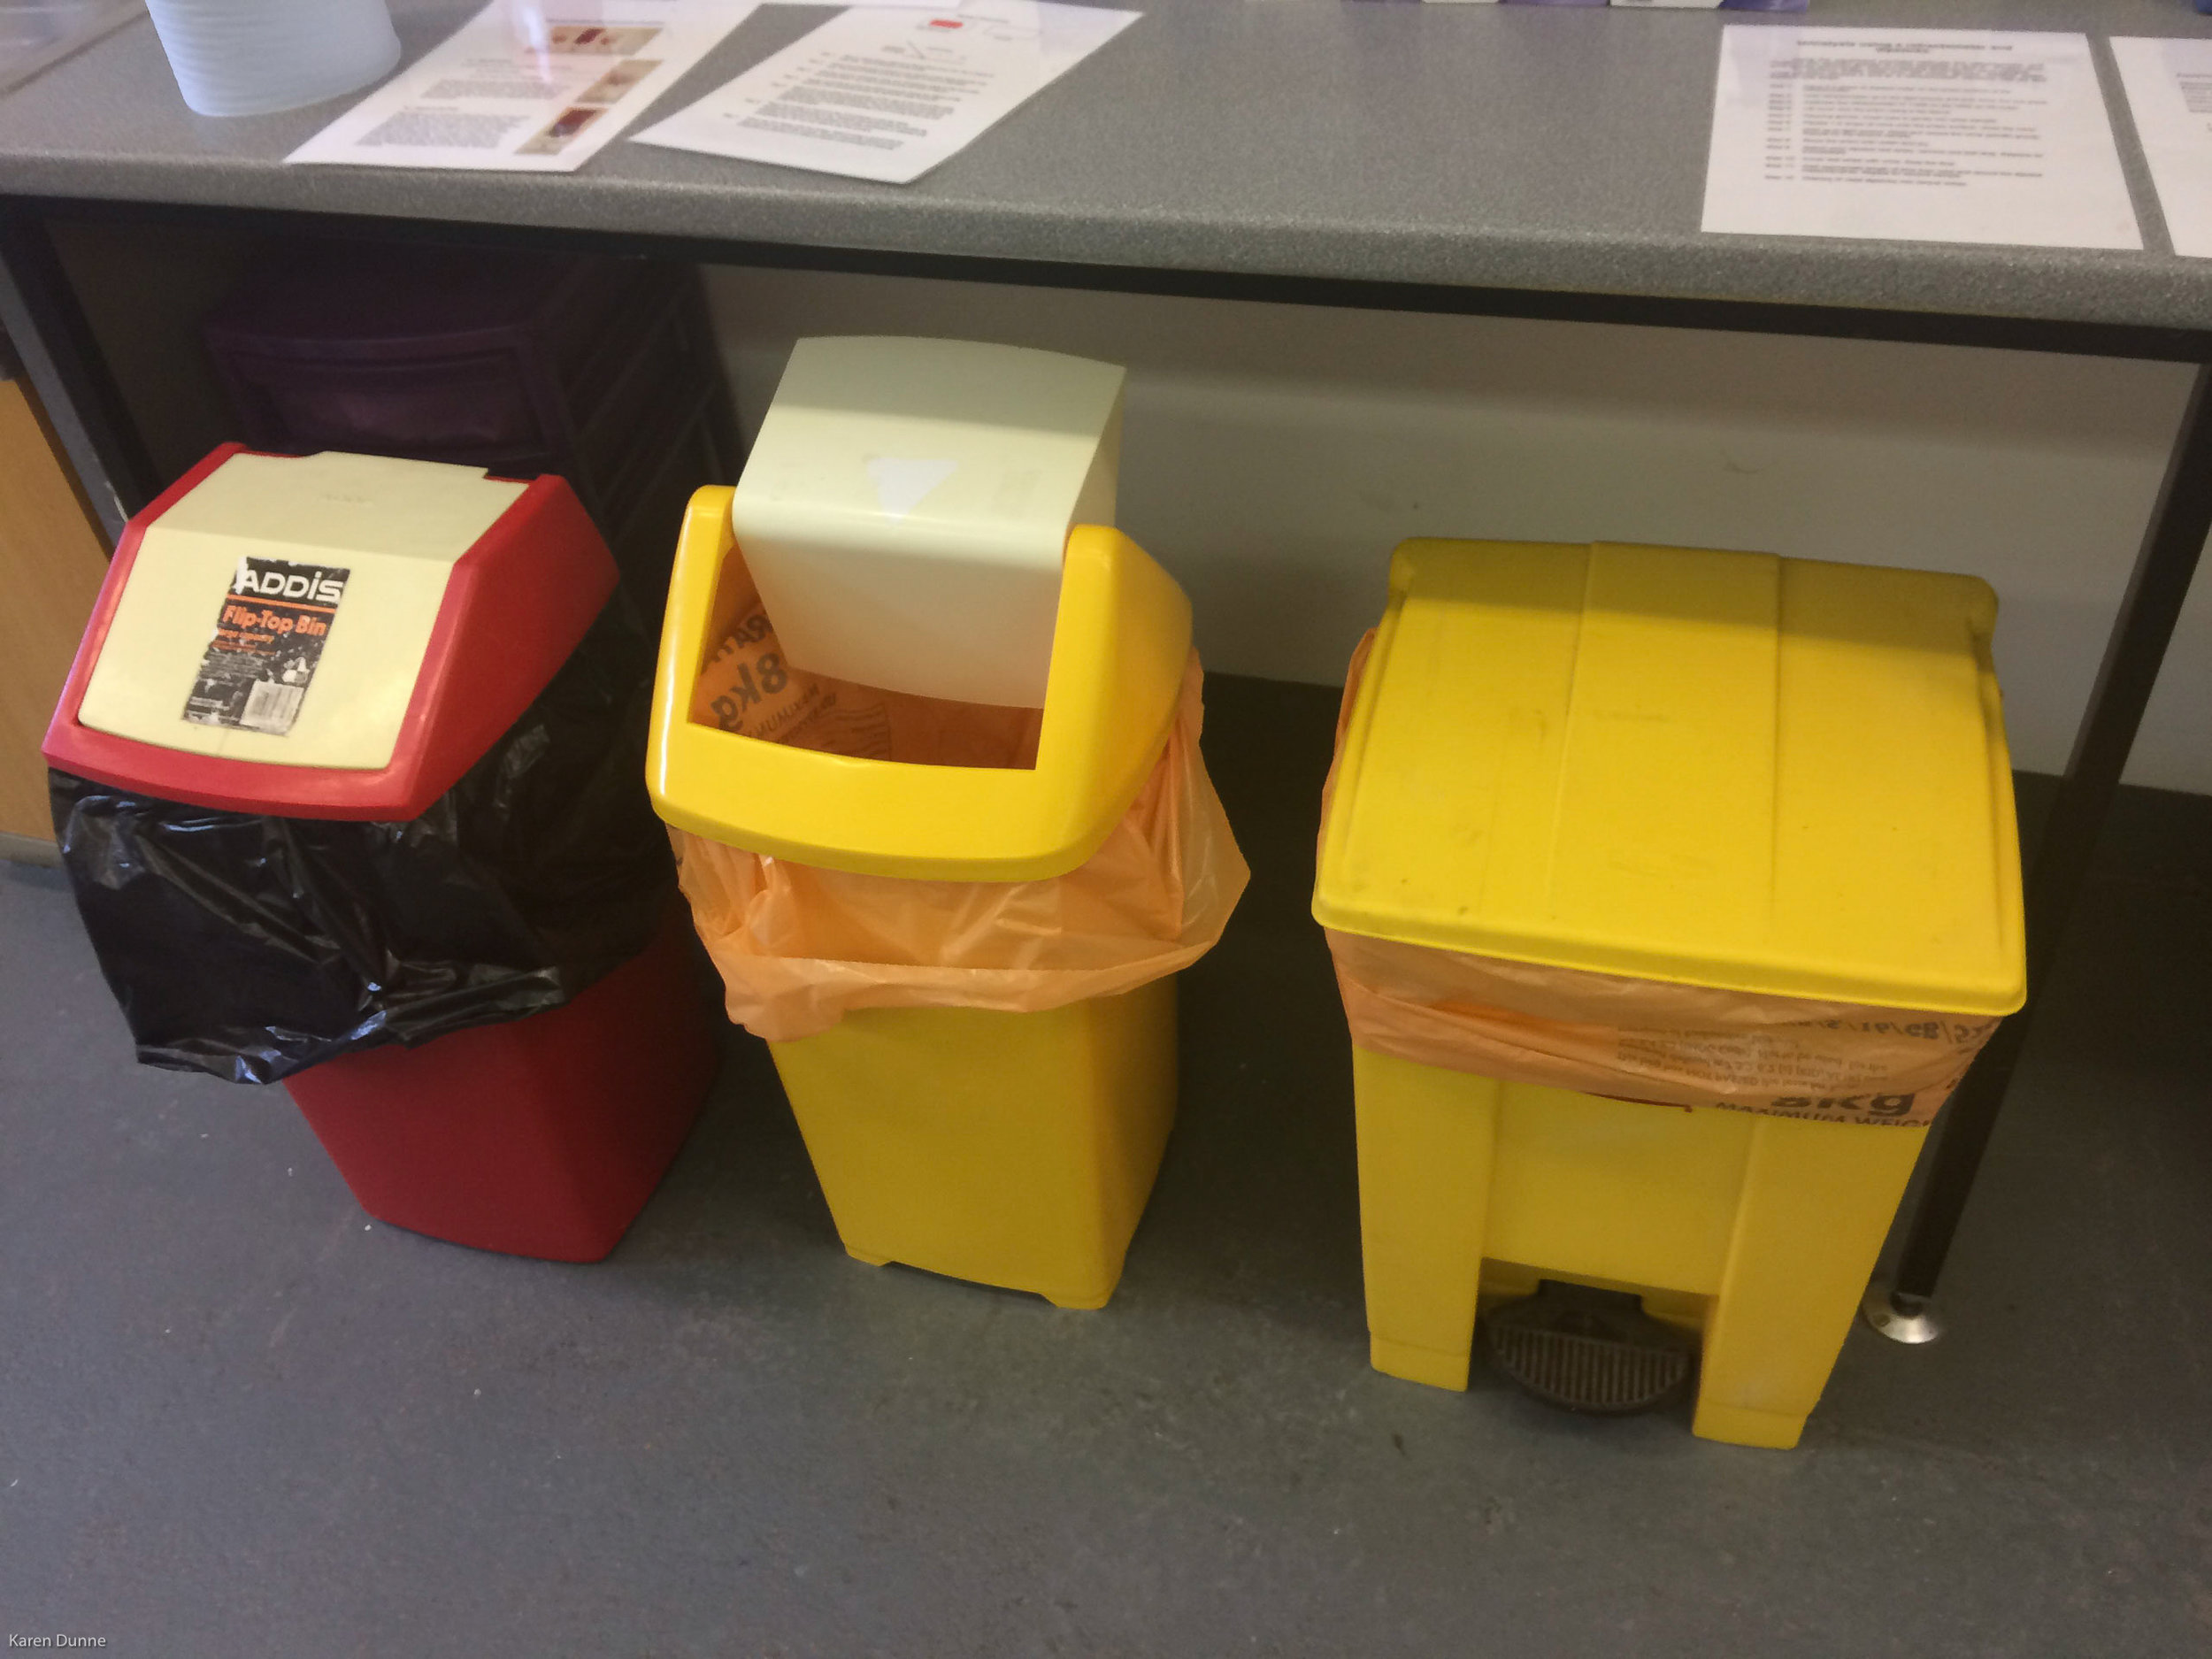 Selection of covered bins